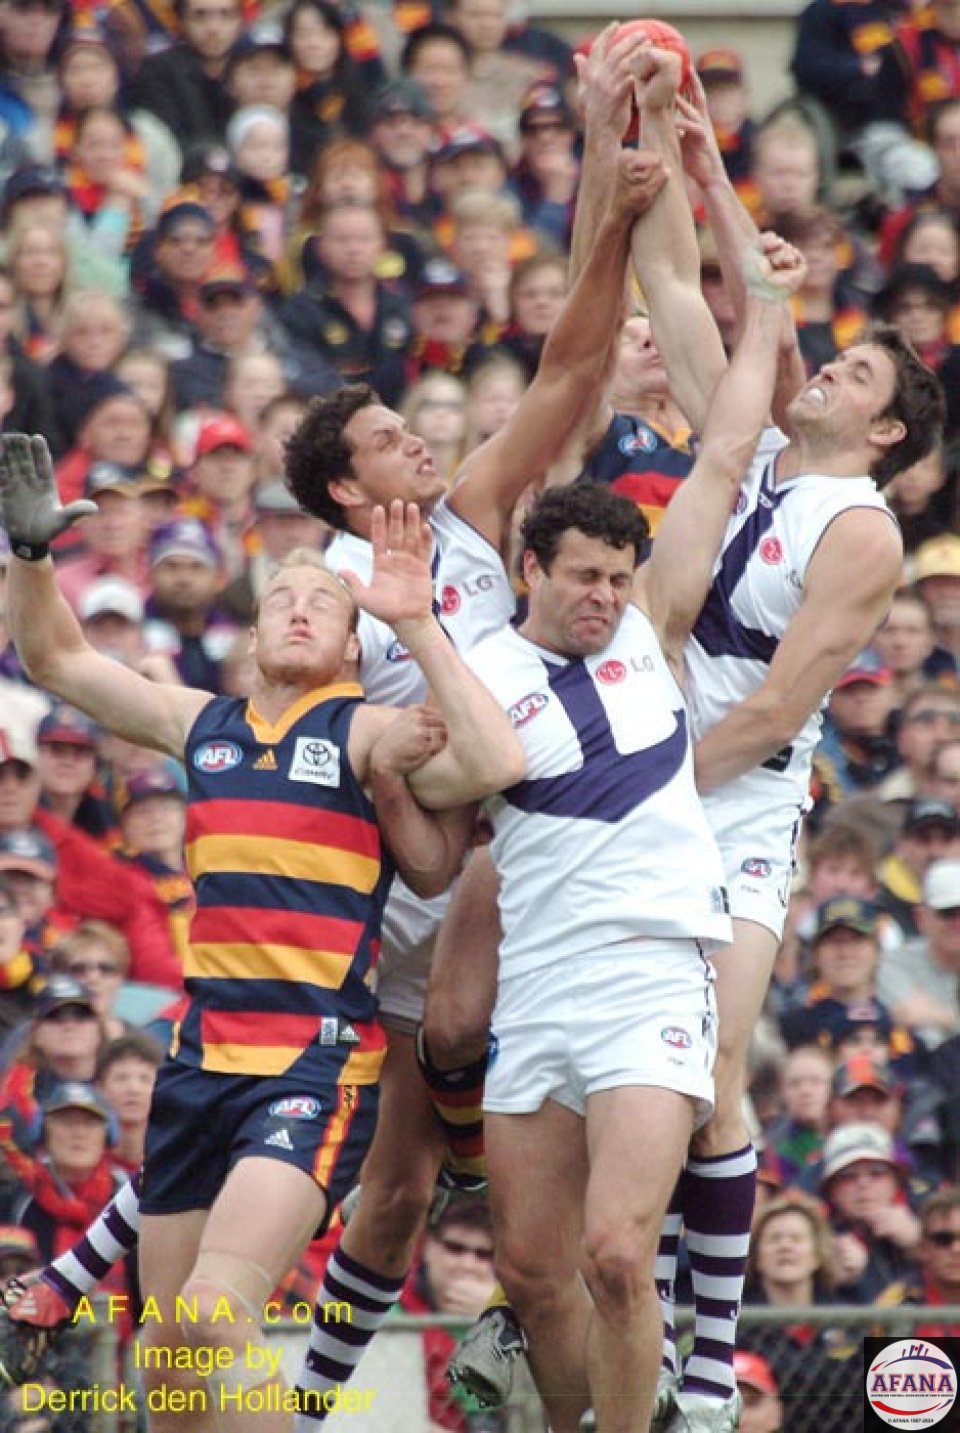 [b]Players collide in a defensive spil in the Dockers defensive half[/b]